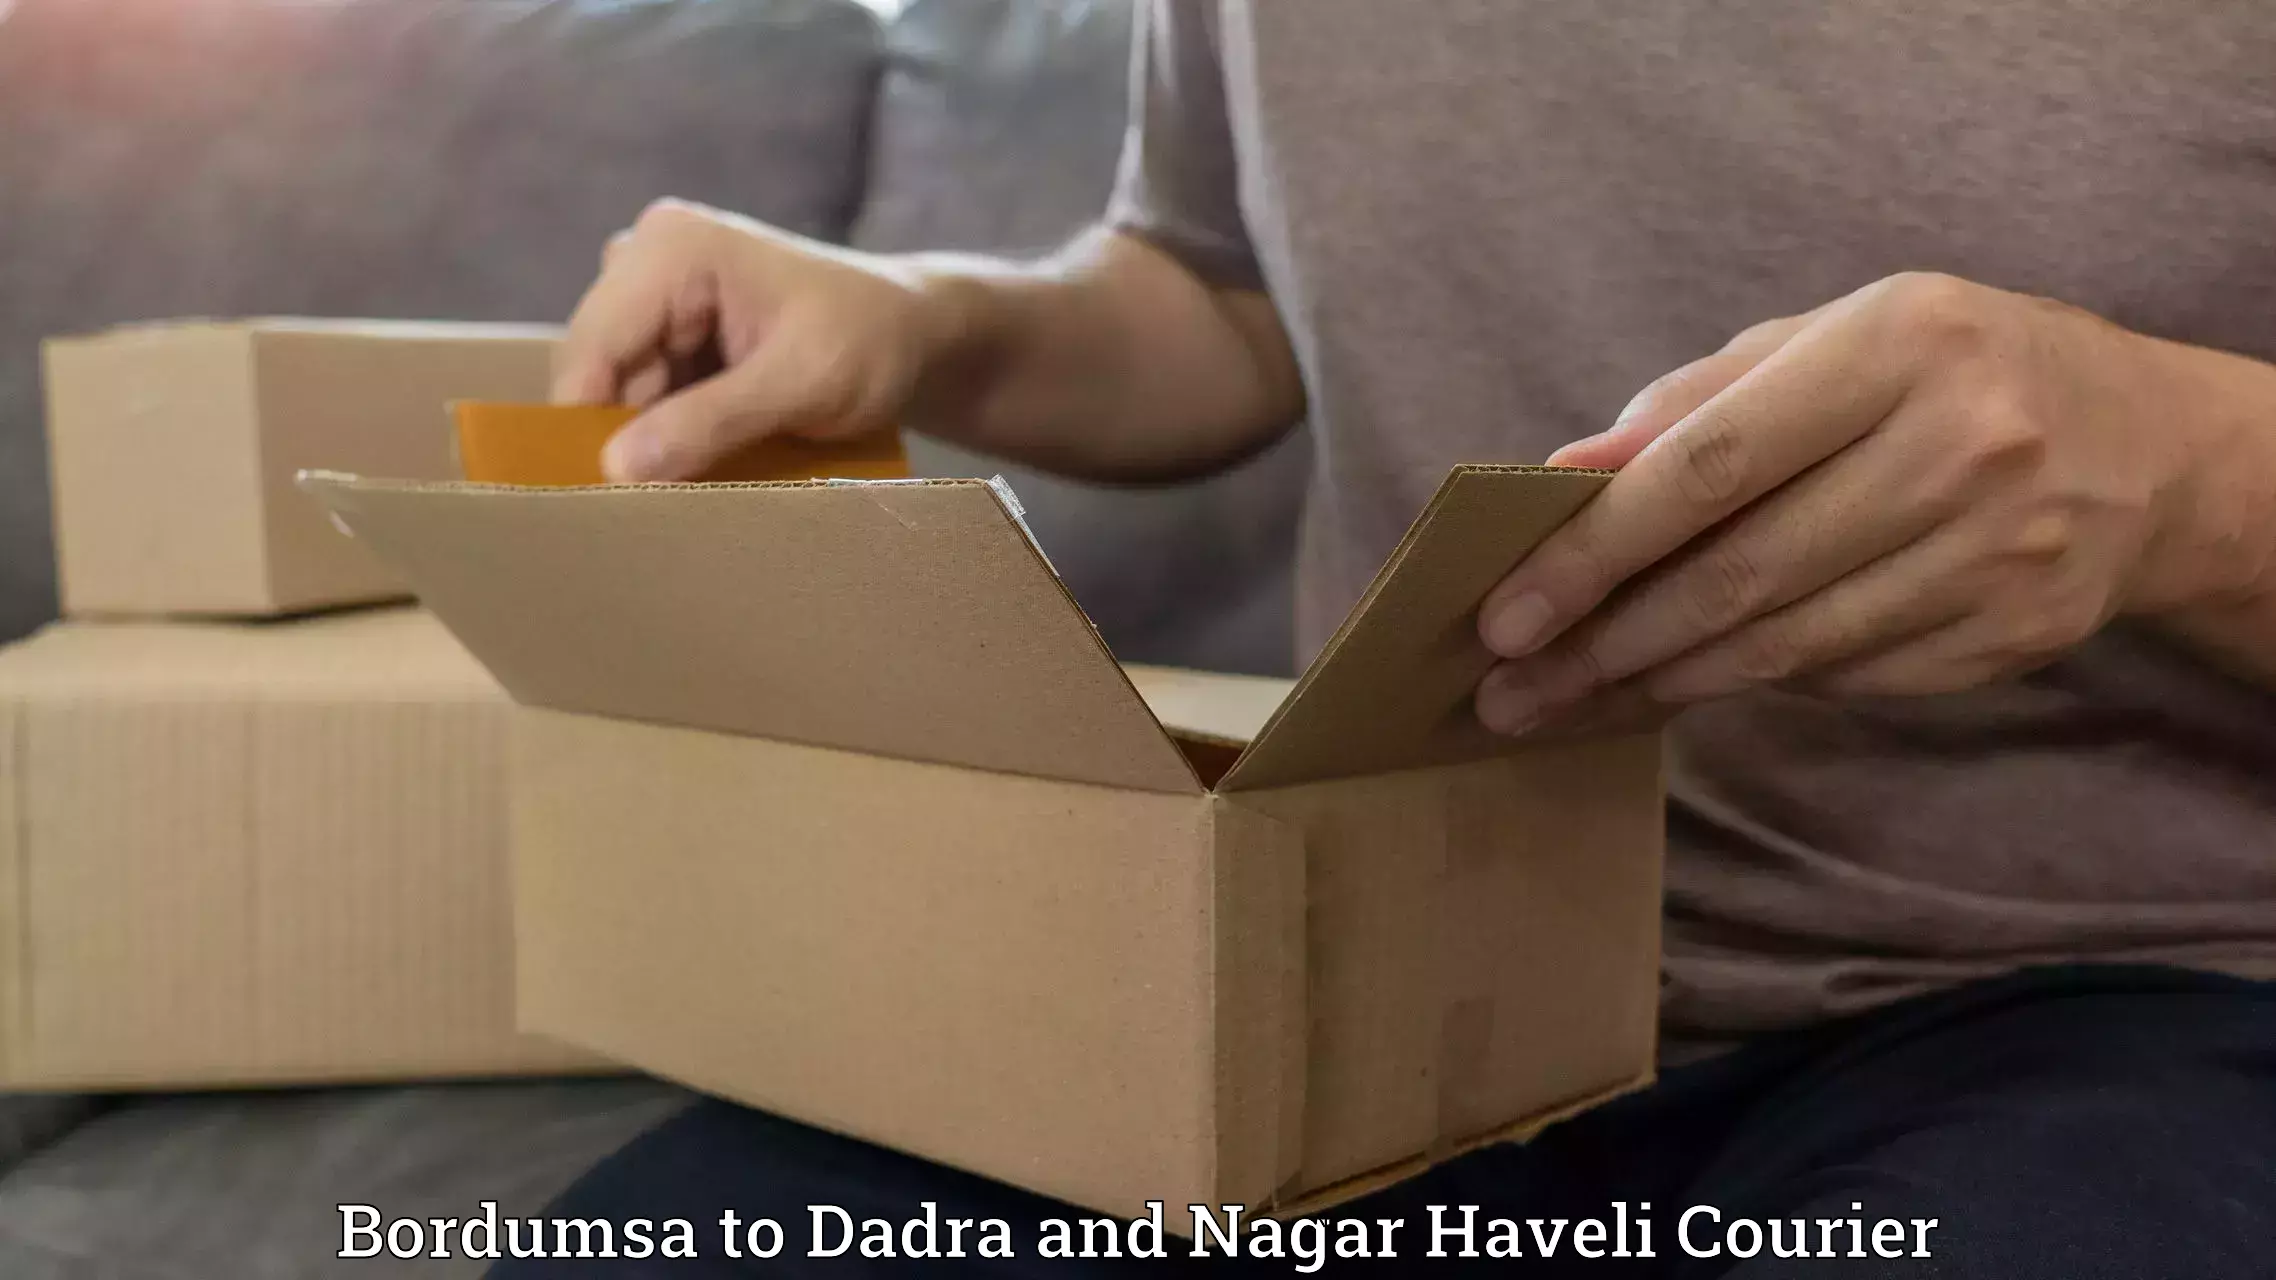 Efficient courier operations Bordumsa to Dadra and Nagar Haveli